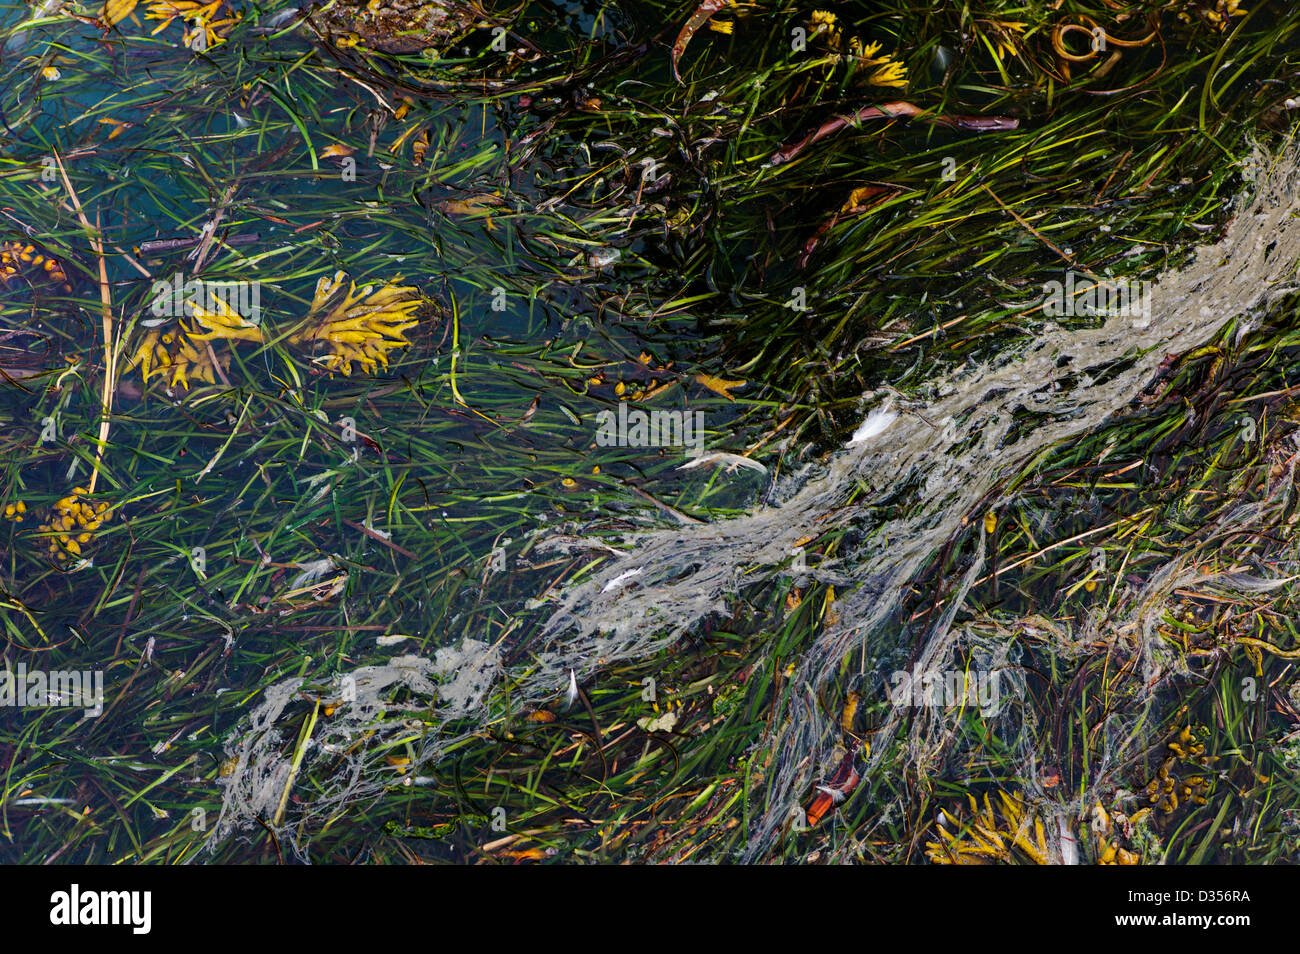 Pollutants mix with seaweed in the harbor water, Homer, Alaska, USA Stock Photo